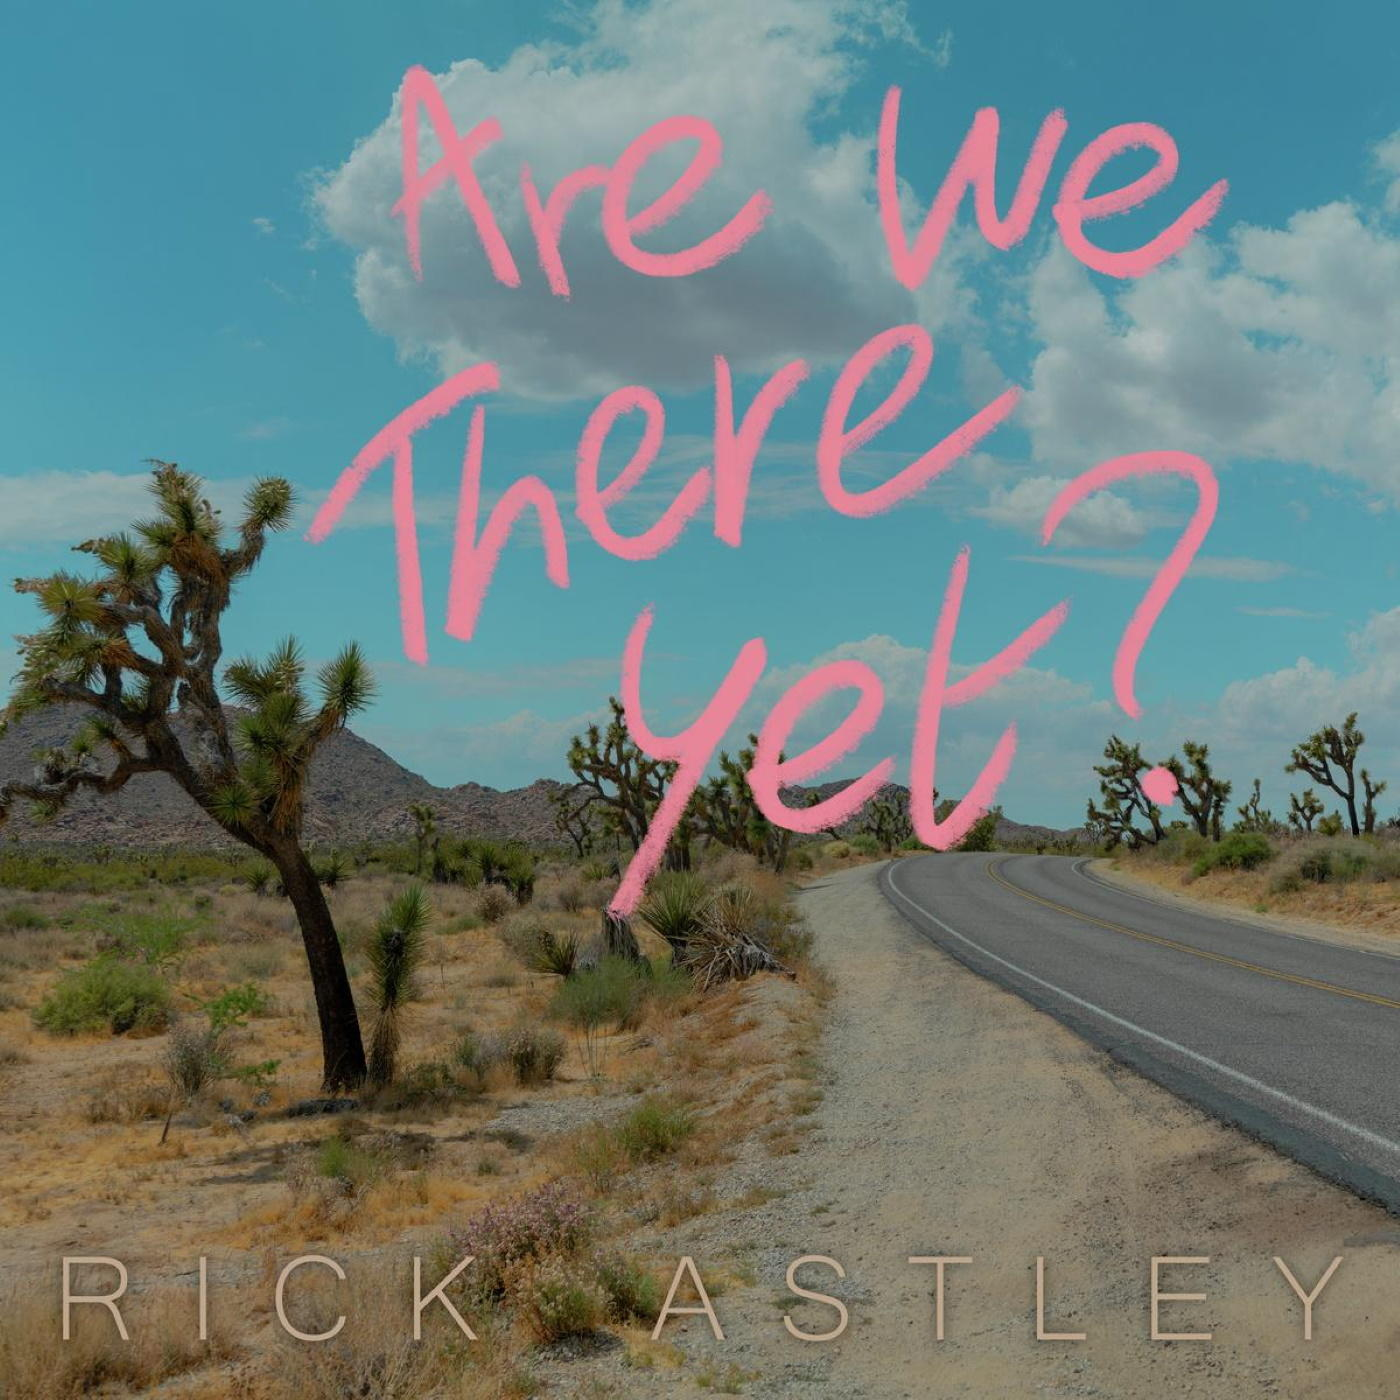 (Vinyl) - Vinyl) Are - Astley There Rick Clear We Yet?(Ltd.Edition